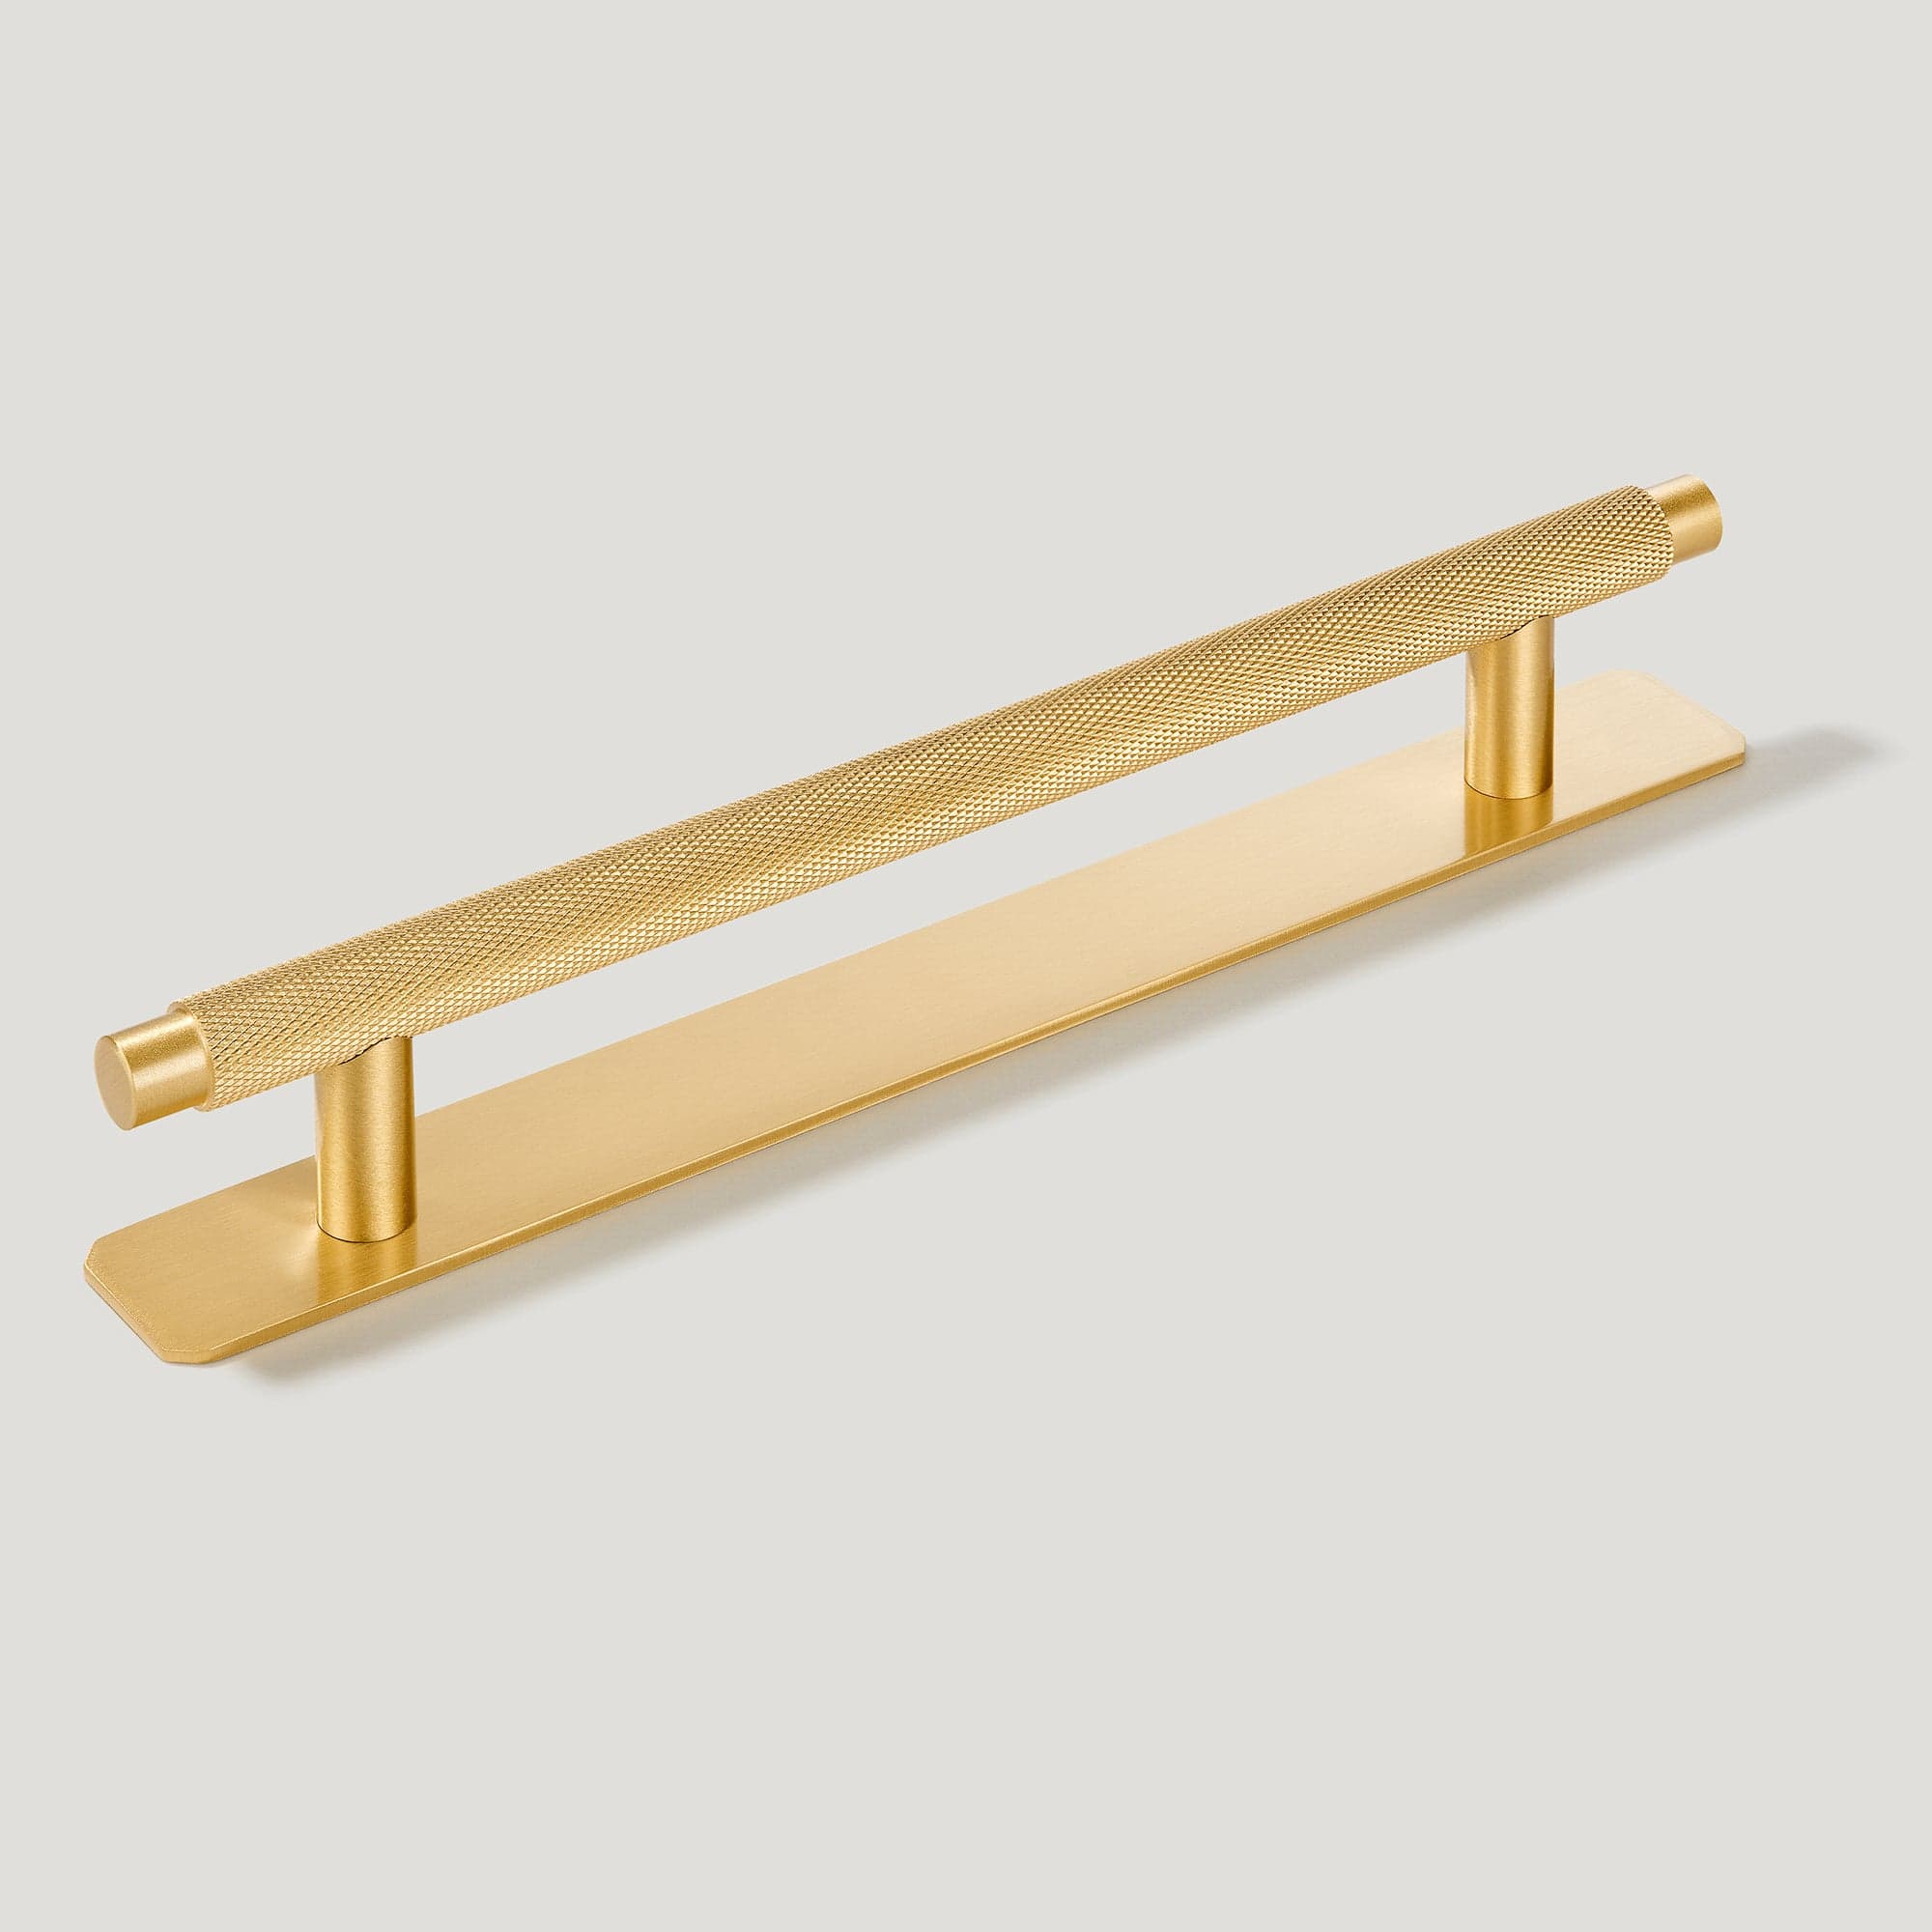 Plank Hardware 6.30'' (3.78'' CC) / Handle with Backplate KEPLER Knurled T-Bar Pull - Brass